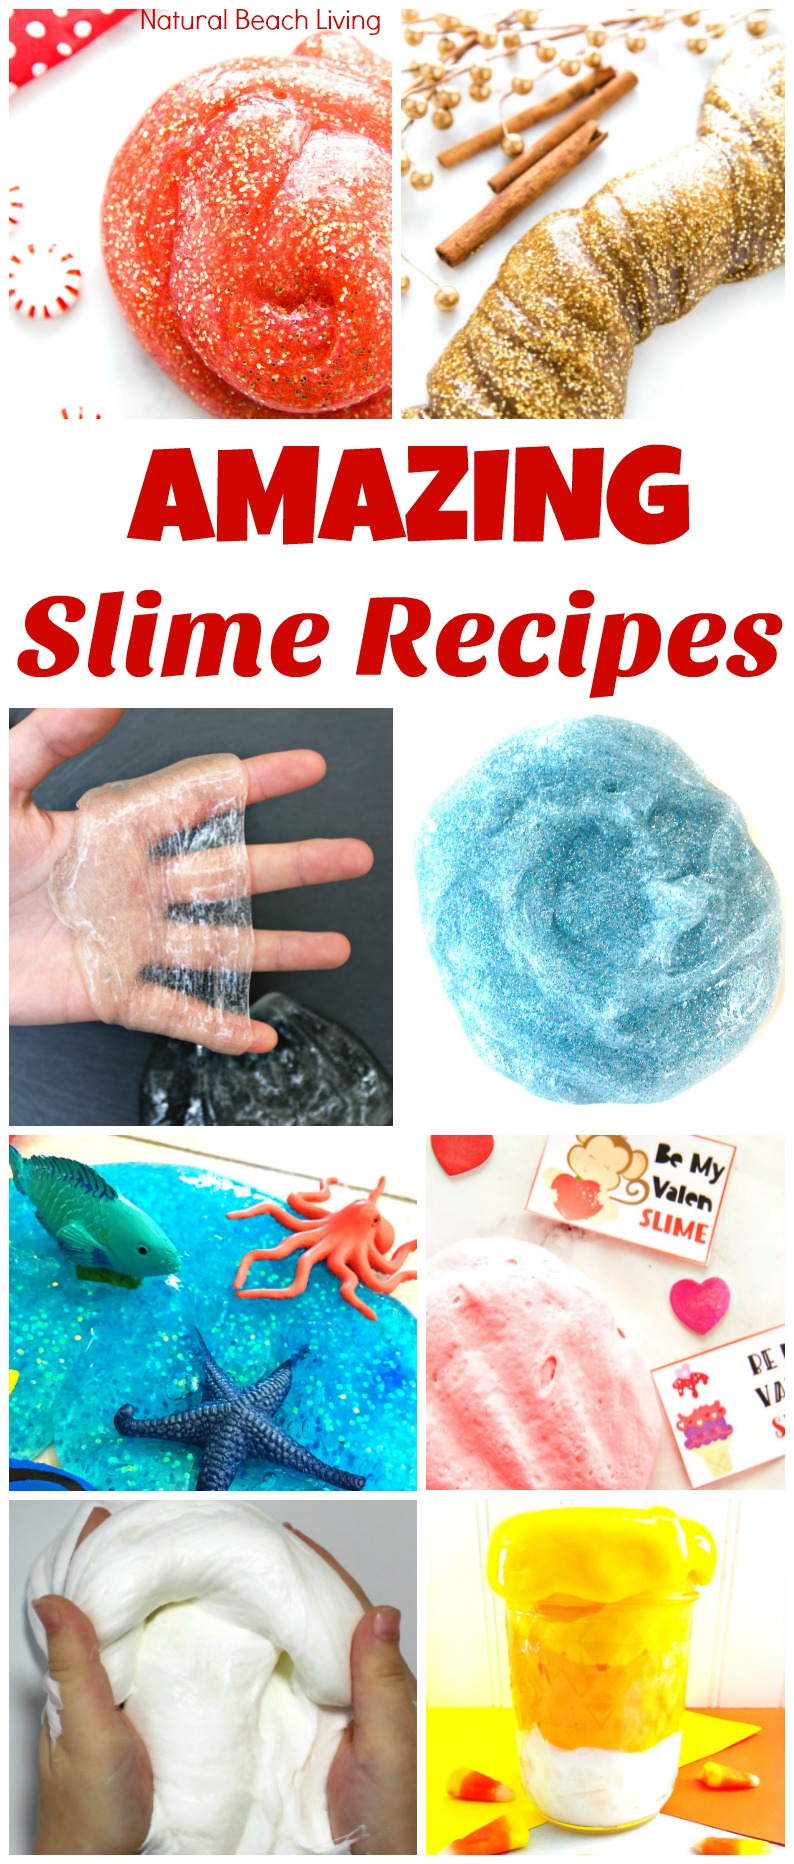 Hot Chocolate Slime Recipe with Contact Solution, How to Make Slime Recipe with Contact Solution that kids will love playing with. Fluffy Contact Solution Slime Recipe or Saline Solution slime with glue! One of the Best Sensory Play ideas for Kids, Our Homemade slime is super easy to make with our slime recipes. Hot Chocolate Theme Activities for Kids and Winter Sensory Play with an Easy Slime Recipe with Baking Soda